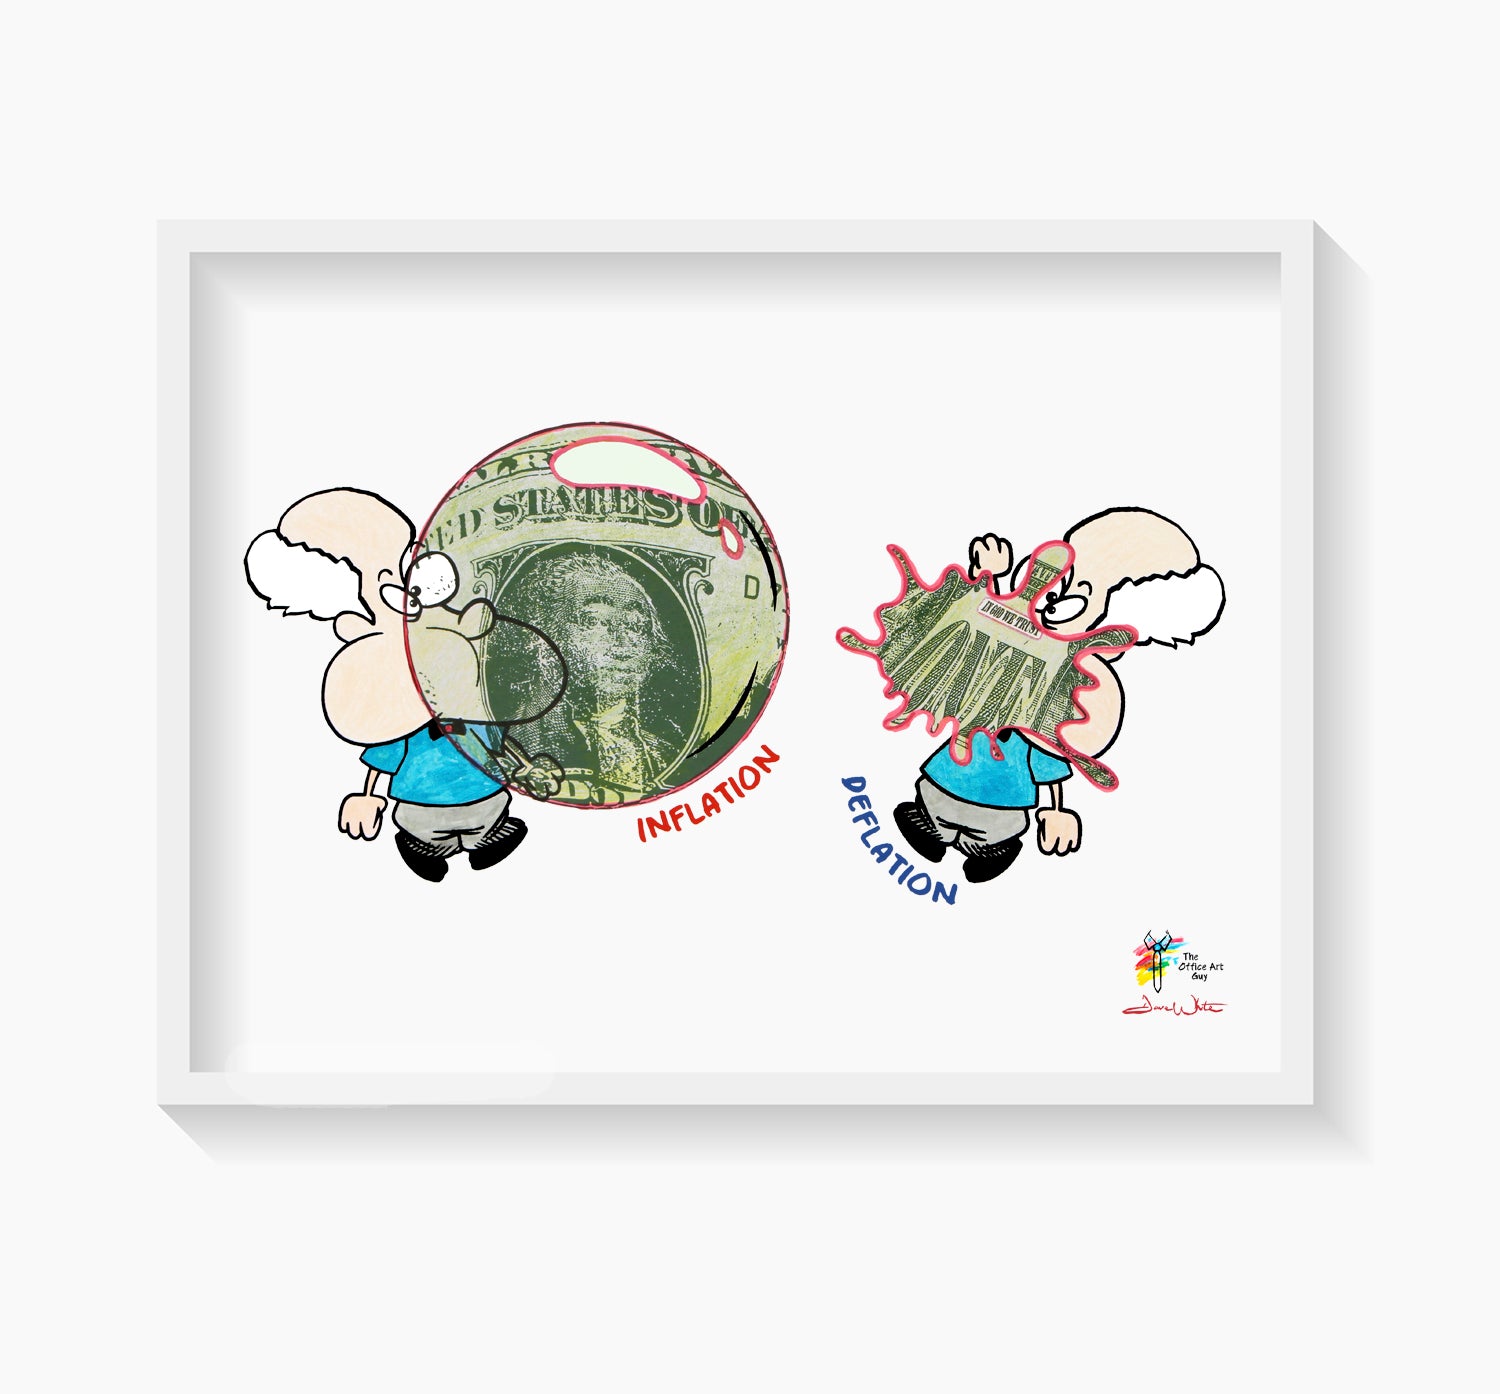 Funny Finance Art Inflation and Deflation Economics Comic Print by The Office Art Guy